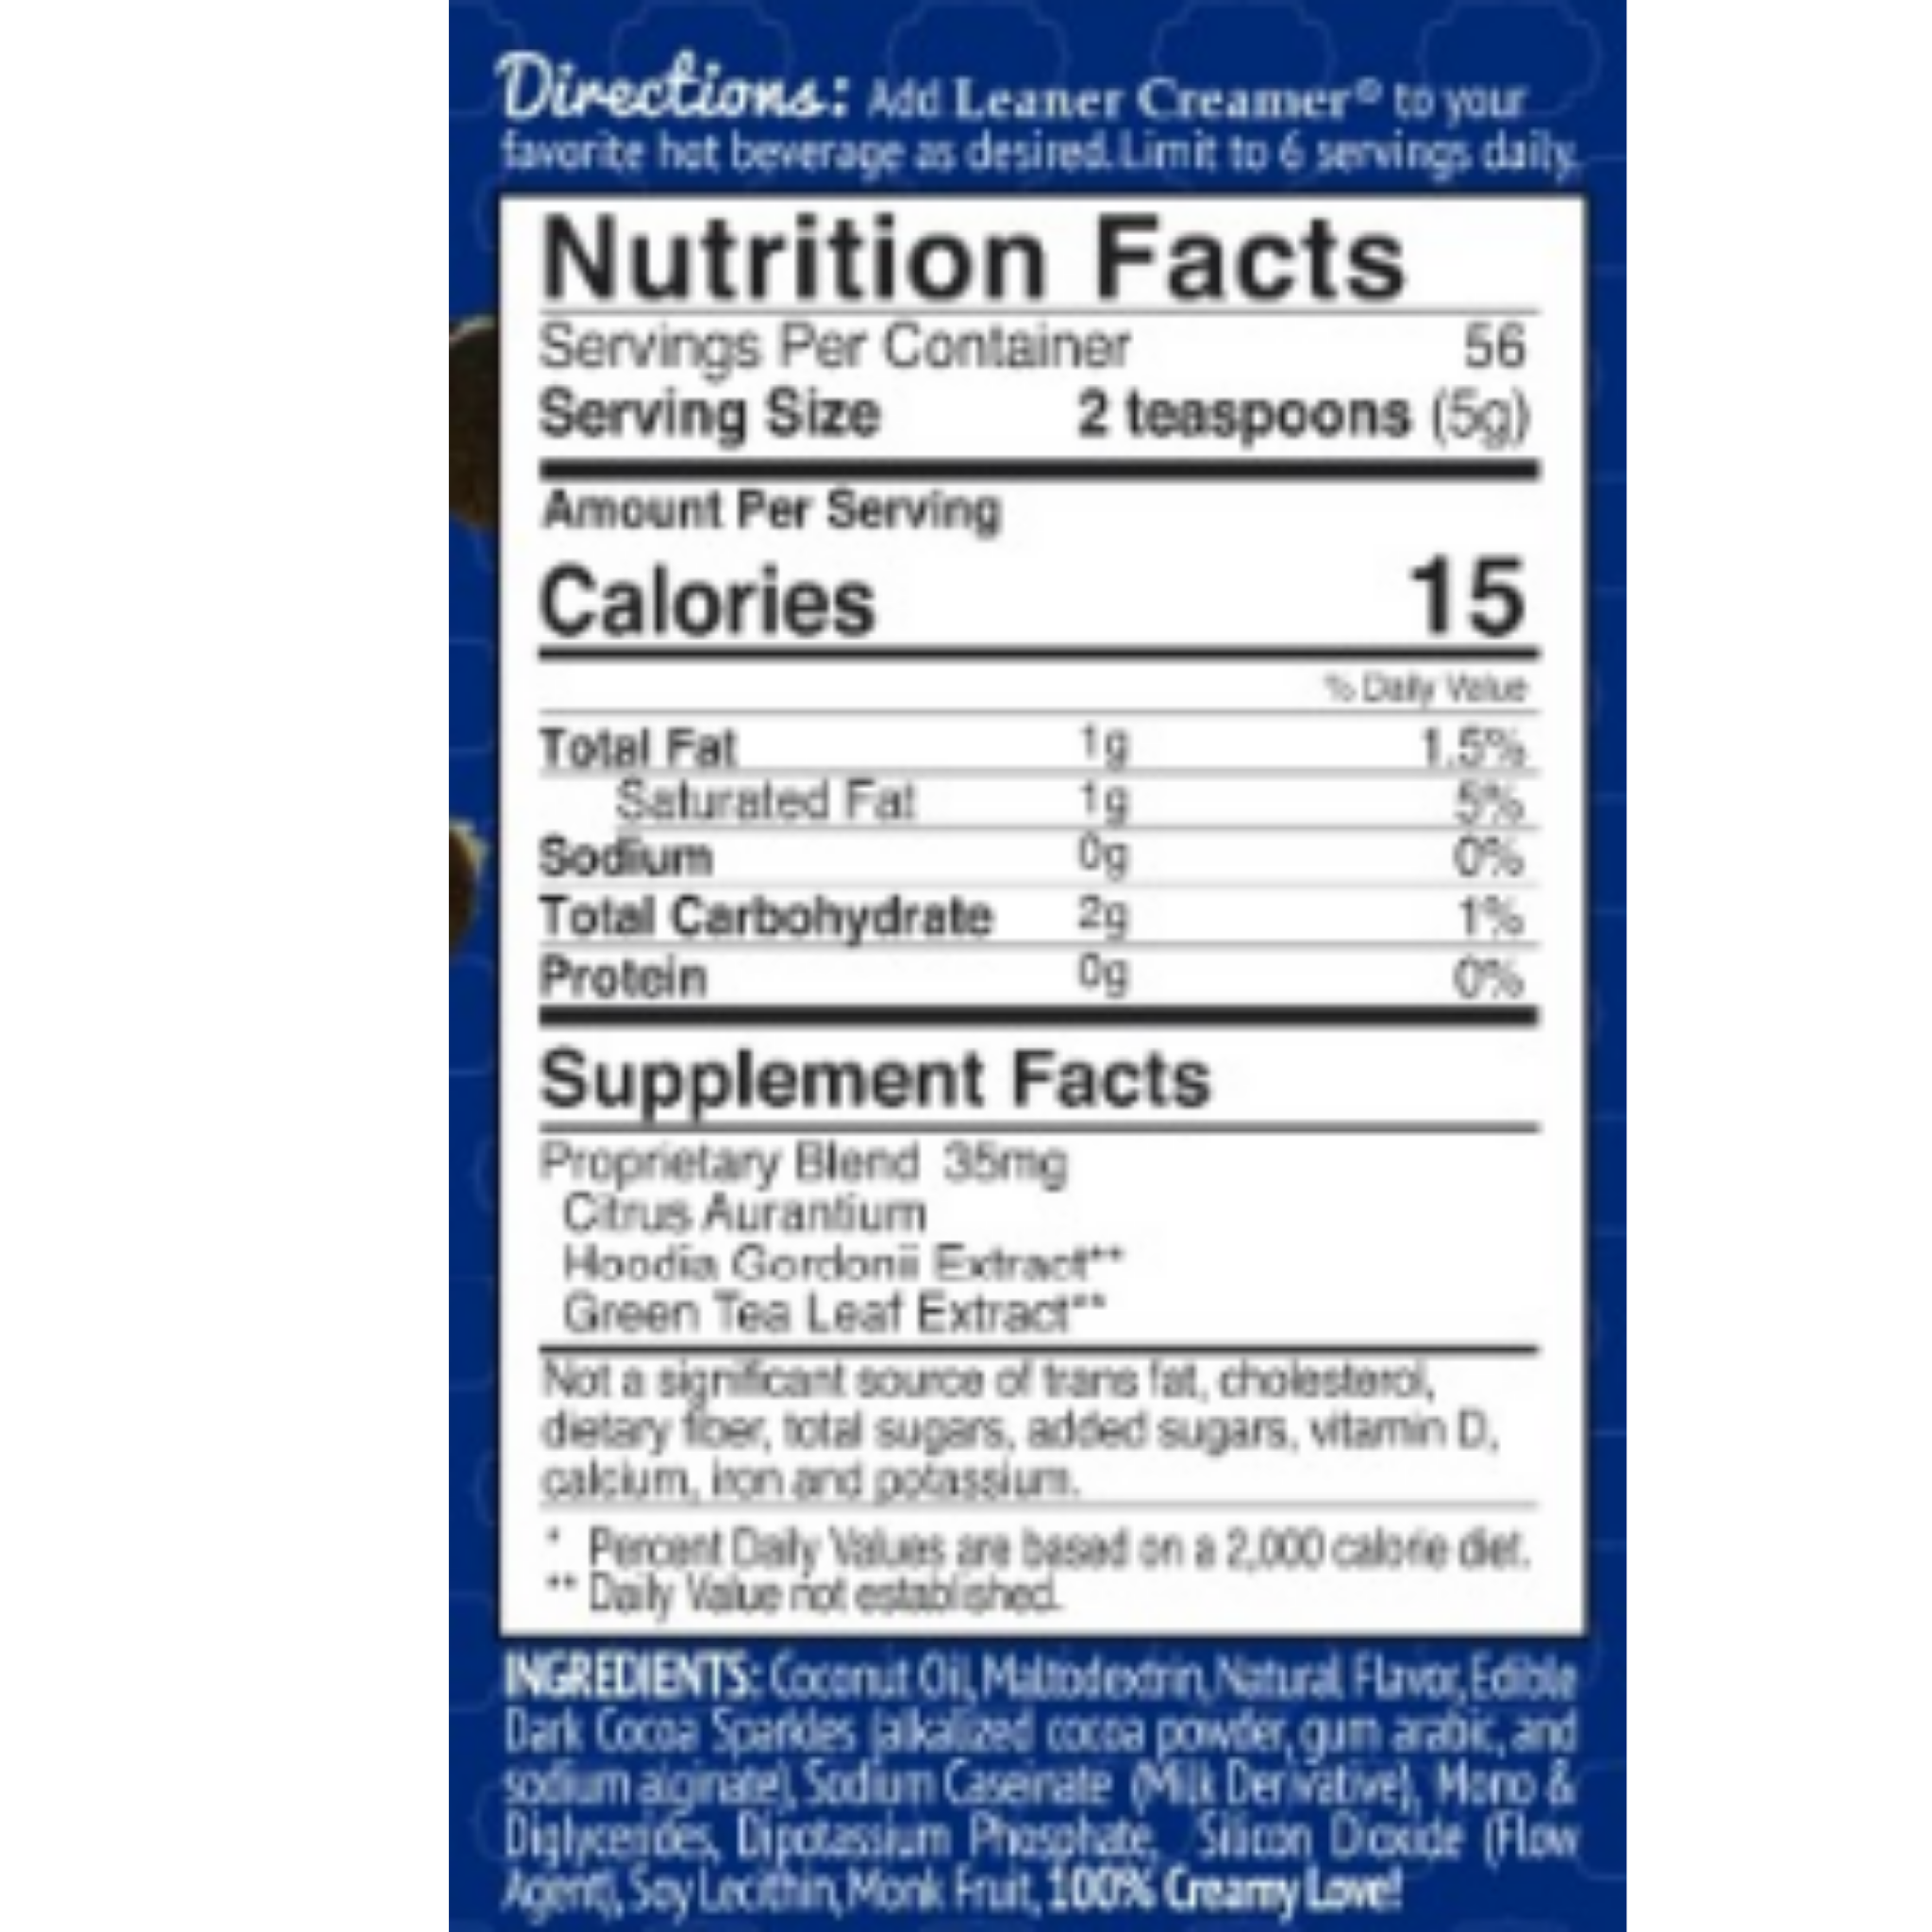 Nutrition Facts for Cookies and Cream LIMITED EDITION by Leaner Creamer